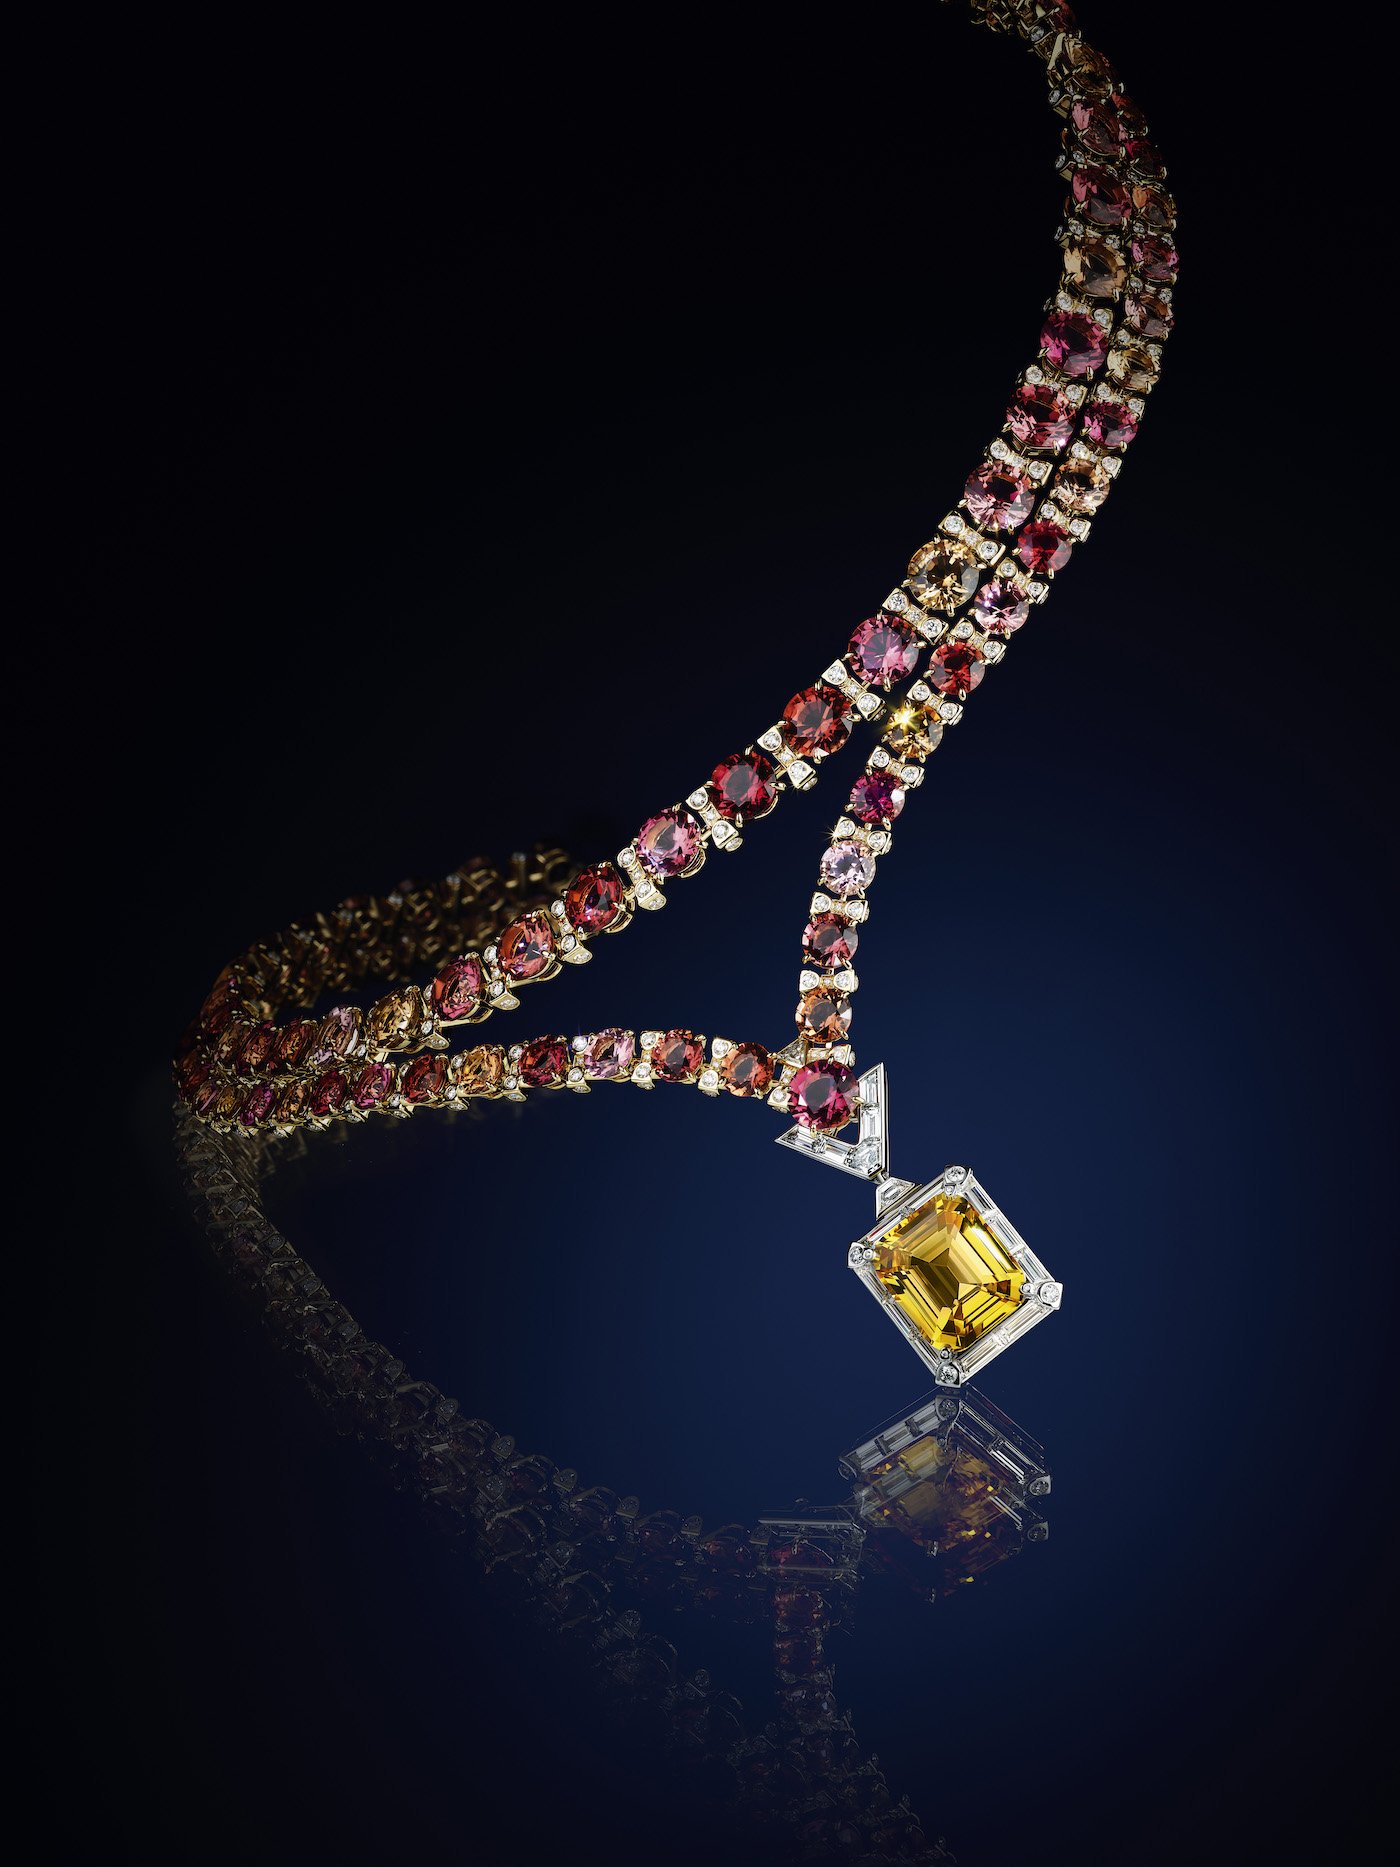 The new Chain Attraction collection of high jewellery from Louis